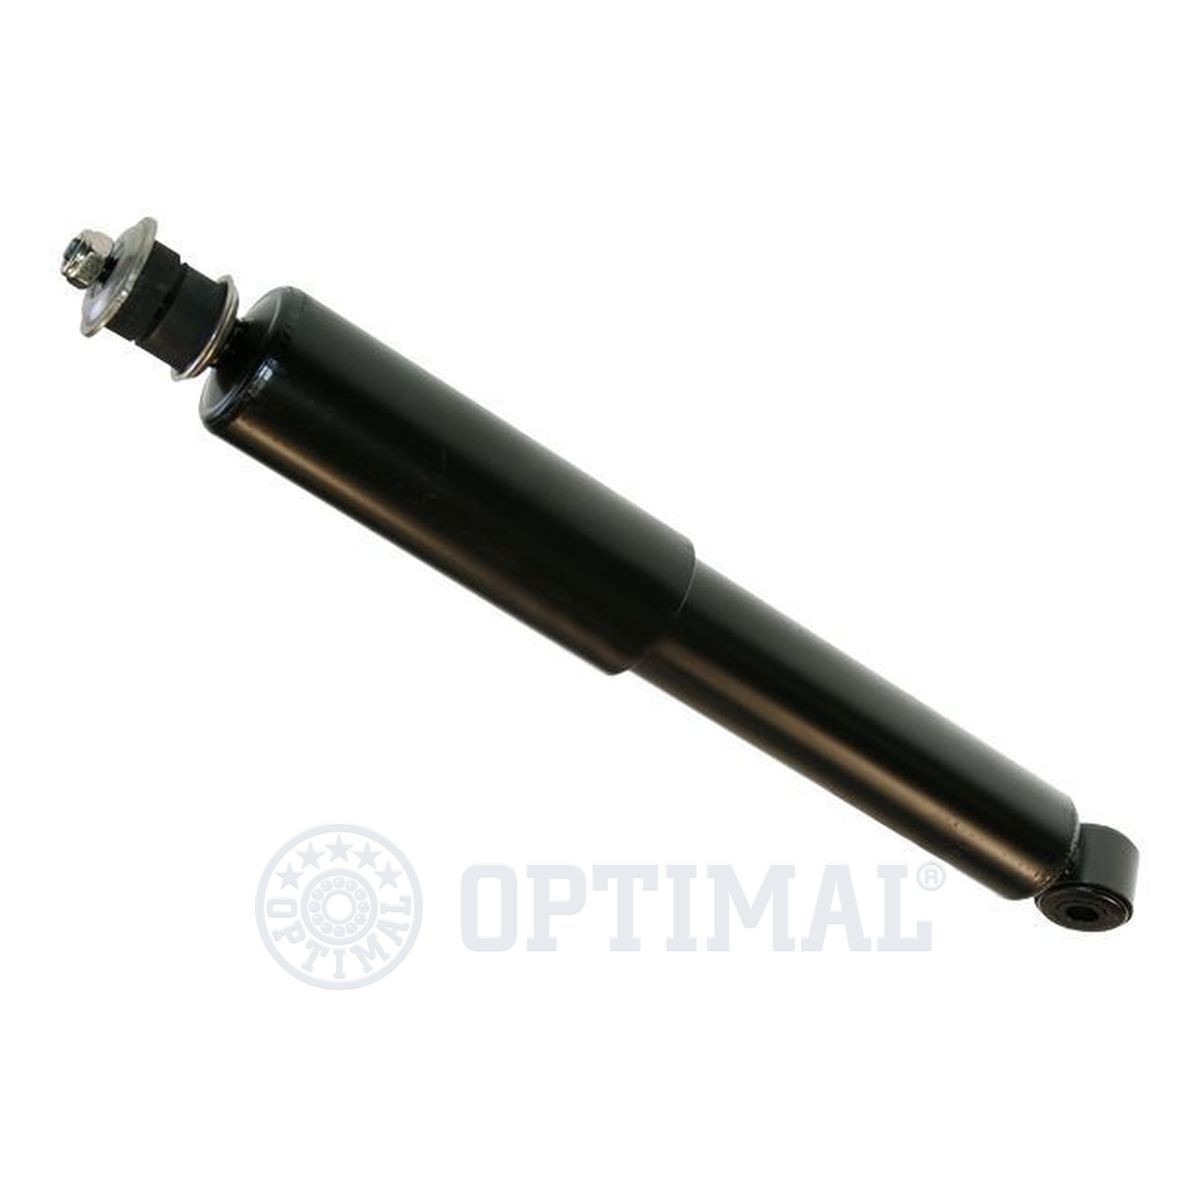 A-2976G OPTIMAL Shock absorbers FORD Front Axle, Gas Pressure, Twin-Tube, Spring-bearing Damper, Bottom eye, Top pin